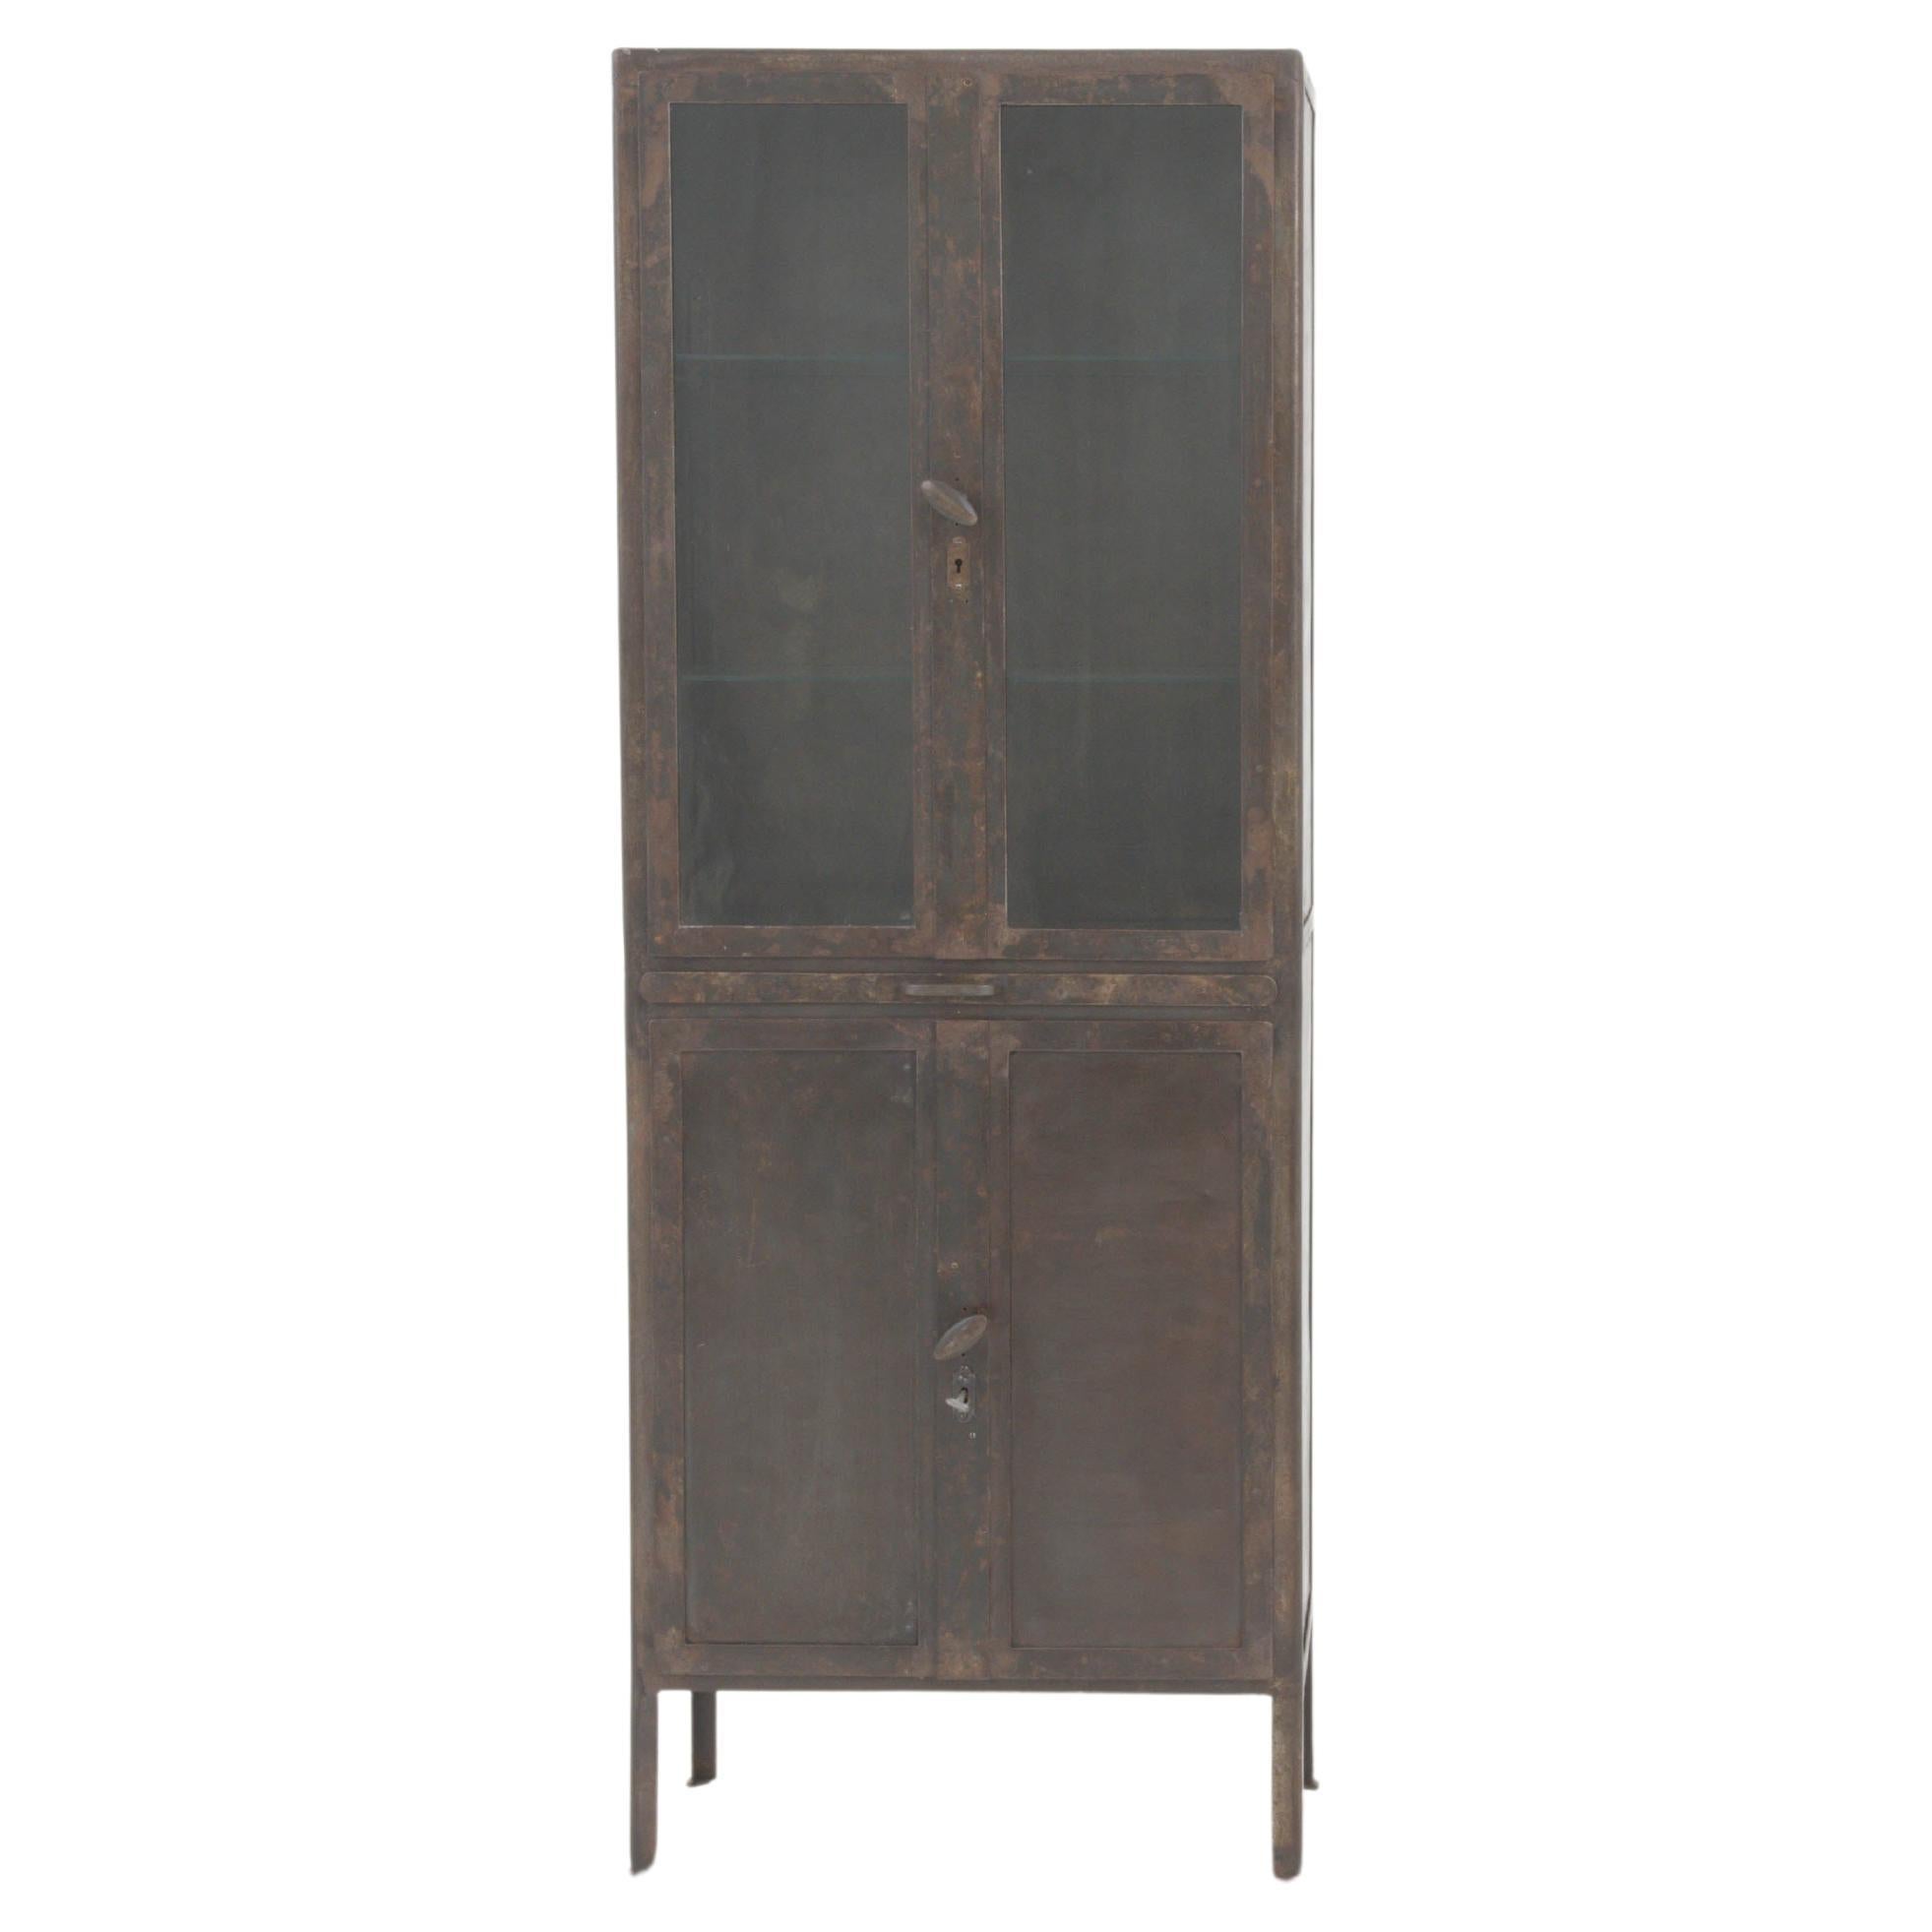 Early 20th Century French Metal Vitrine For Sale